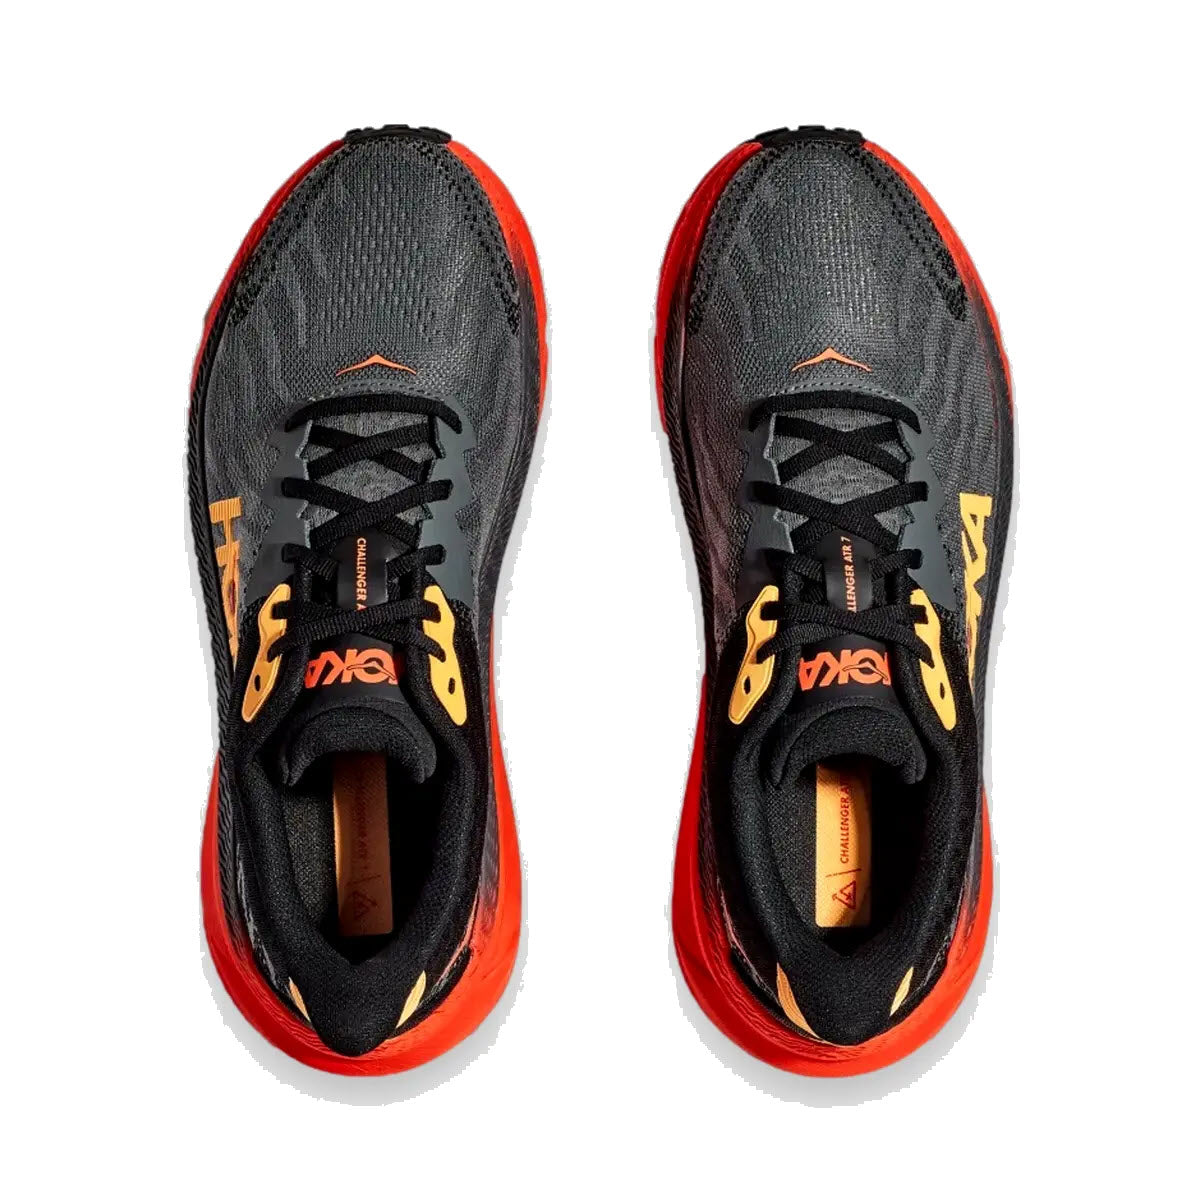 A pair of Hoka Challenger ATR 7 Castlerock/Flame trail running shoes with orange accents, viewed from above, on a white background.